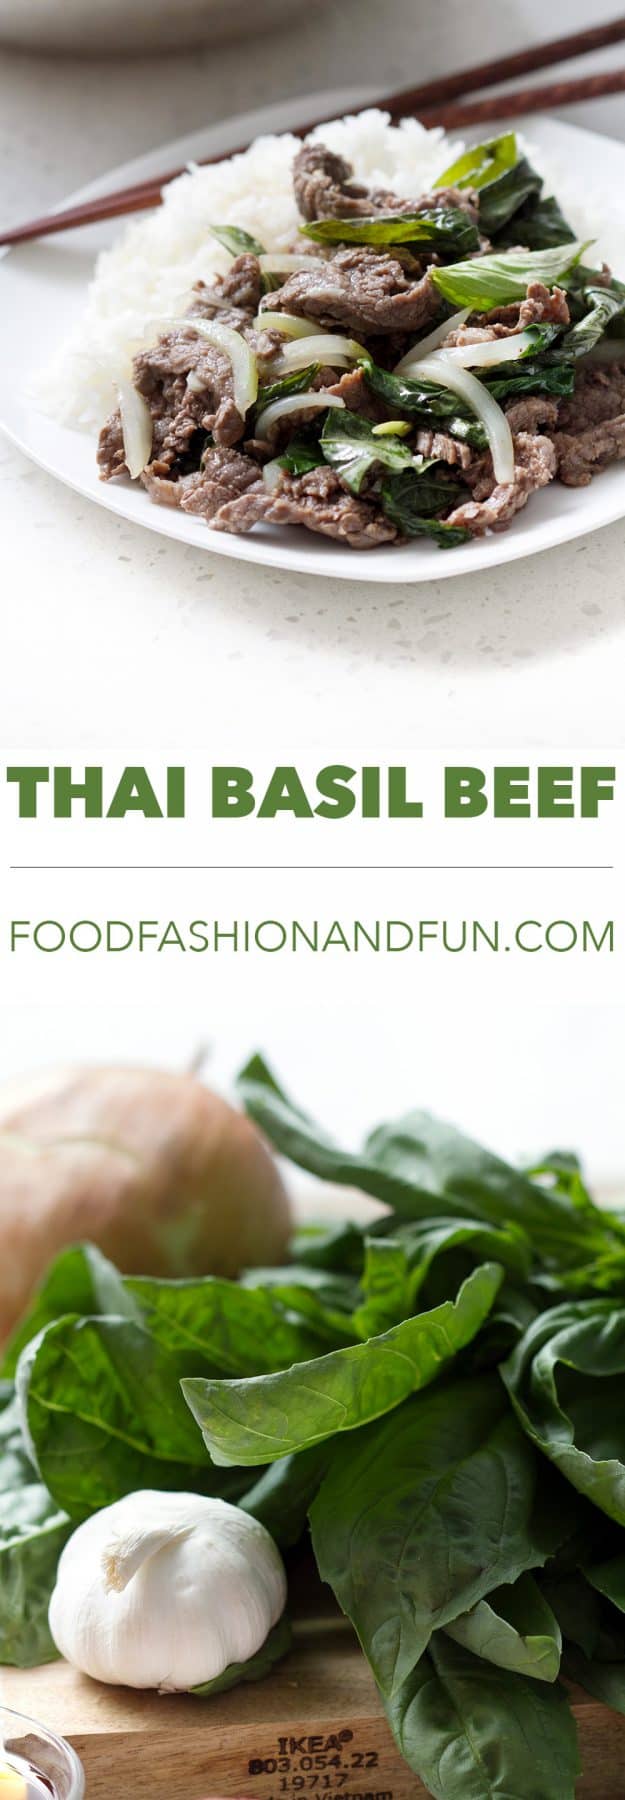 This is a soy free stir-fry recipe for the traditional Basil Beef. This recipe is allergy friendly (gluten, dairy, shellfish, nut, egg, and soy free) and suits the autoimmune protocol and paleo diets.